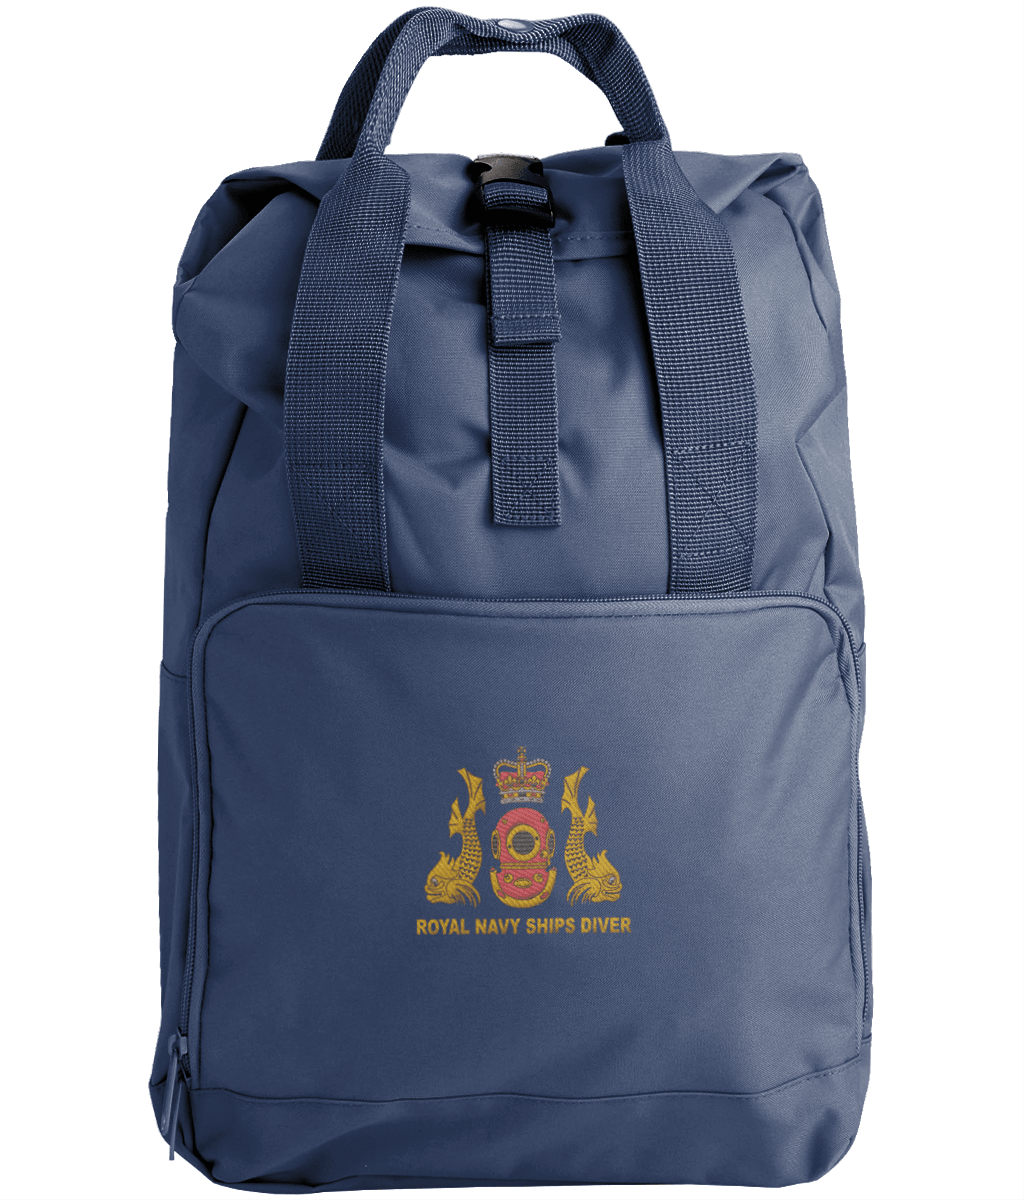 Royal Navy Ships Diver - Embroidered Twin Handle Roll-Top Backpack - Divers Gifts